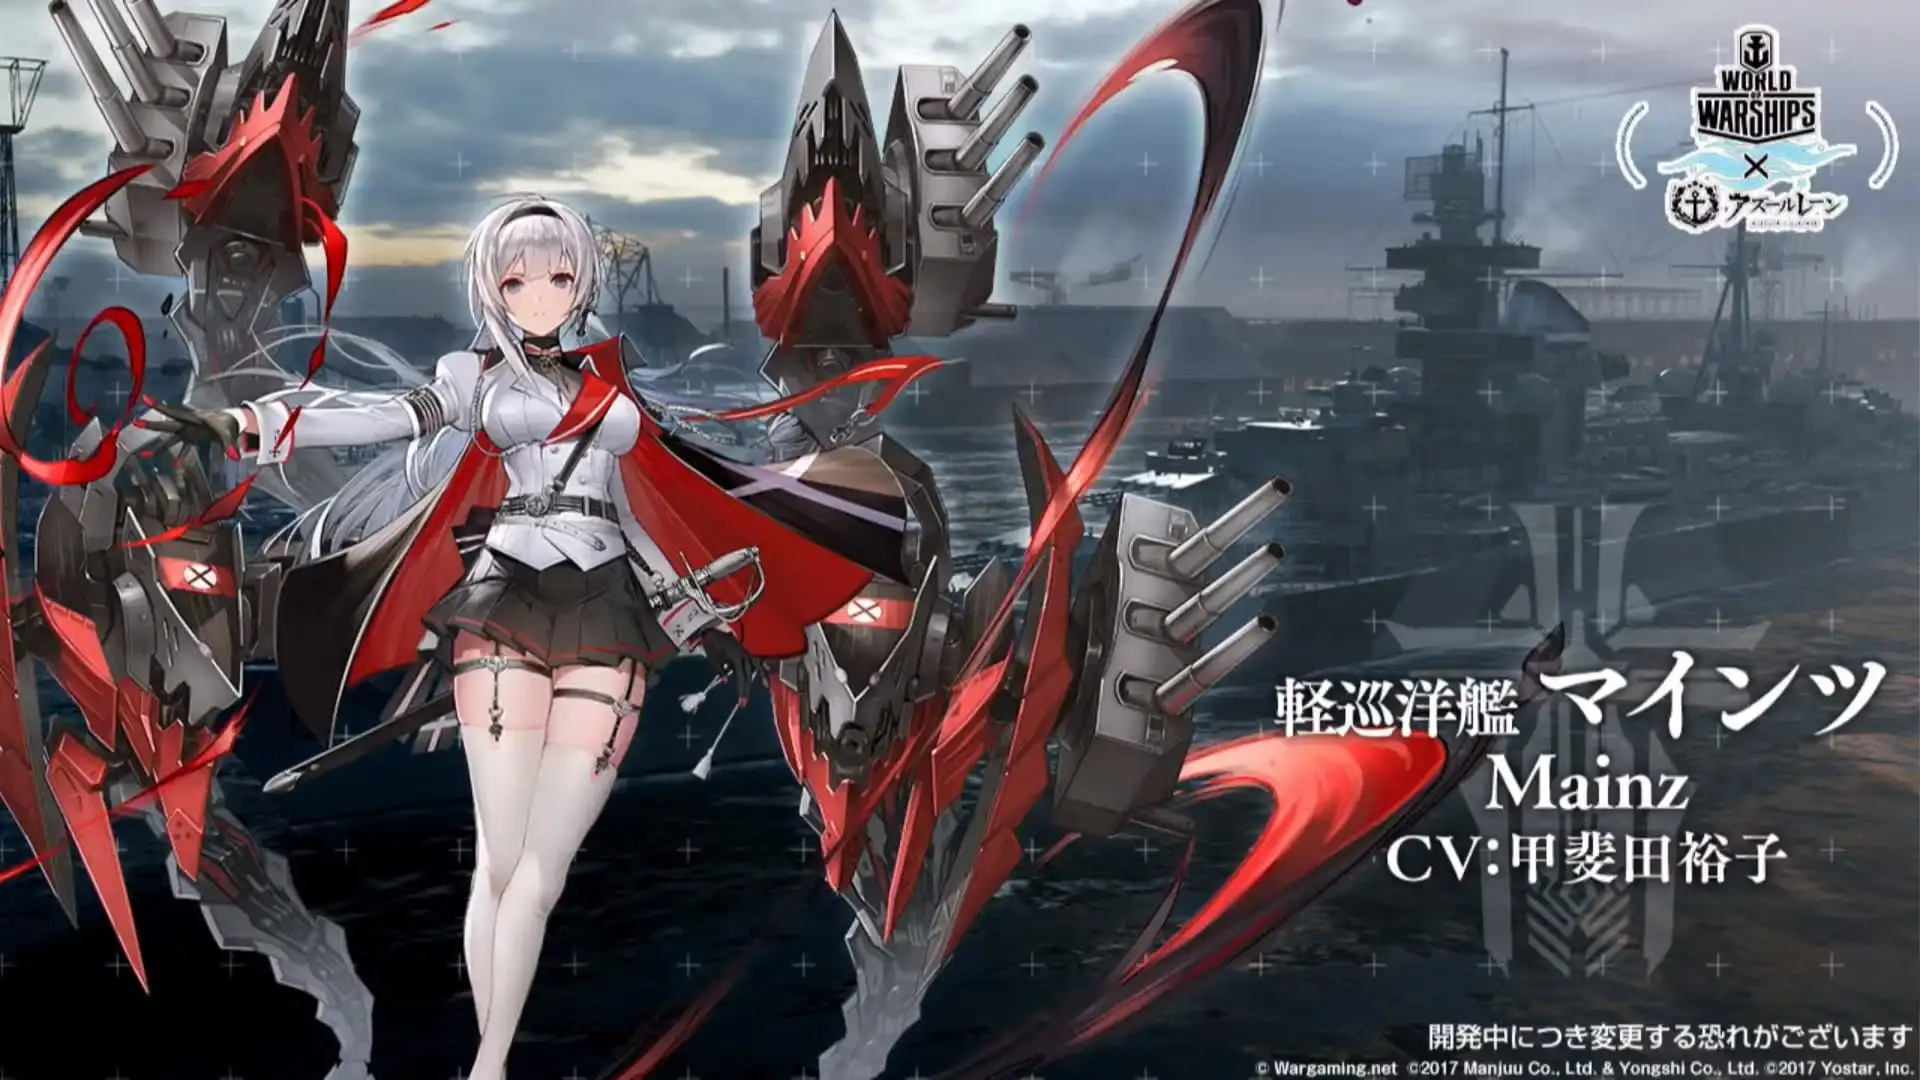 when can i buy azur lane crates in world of warships us